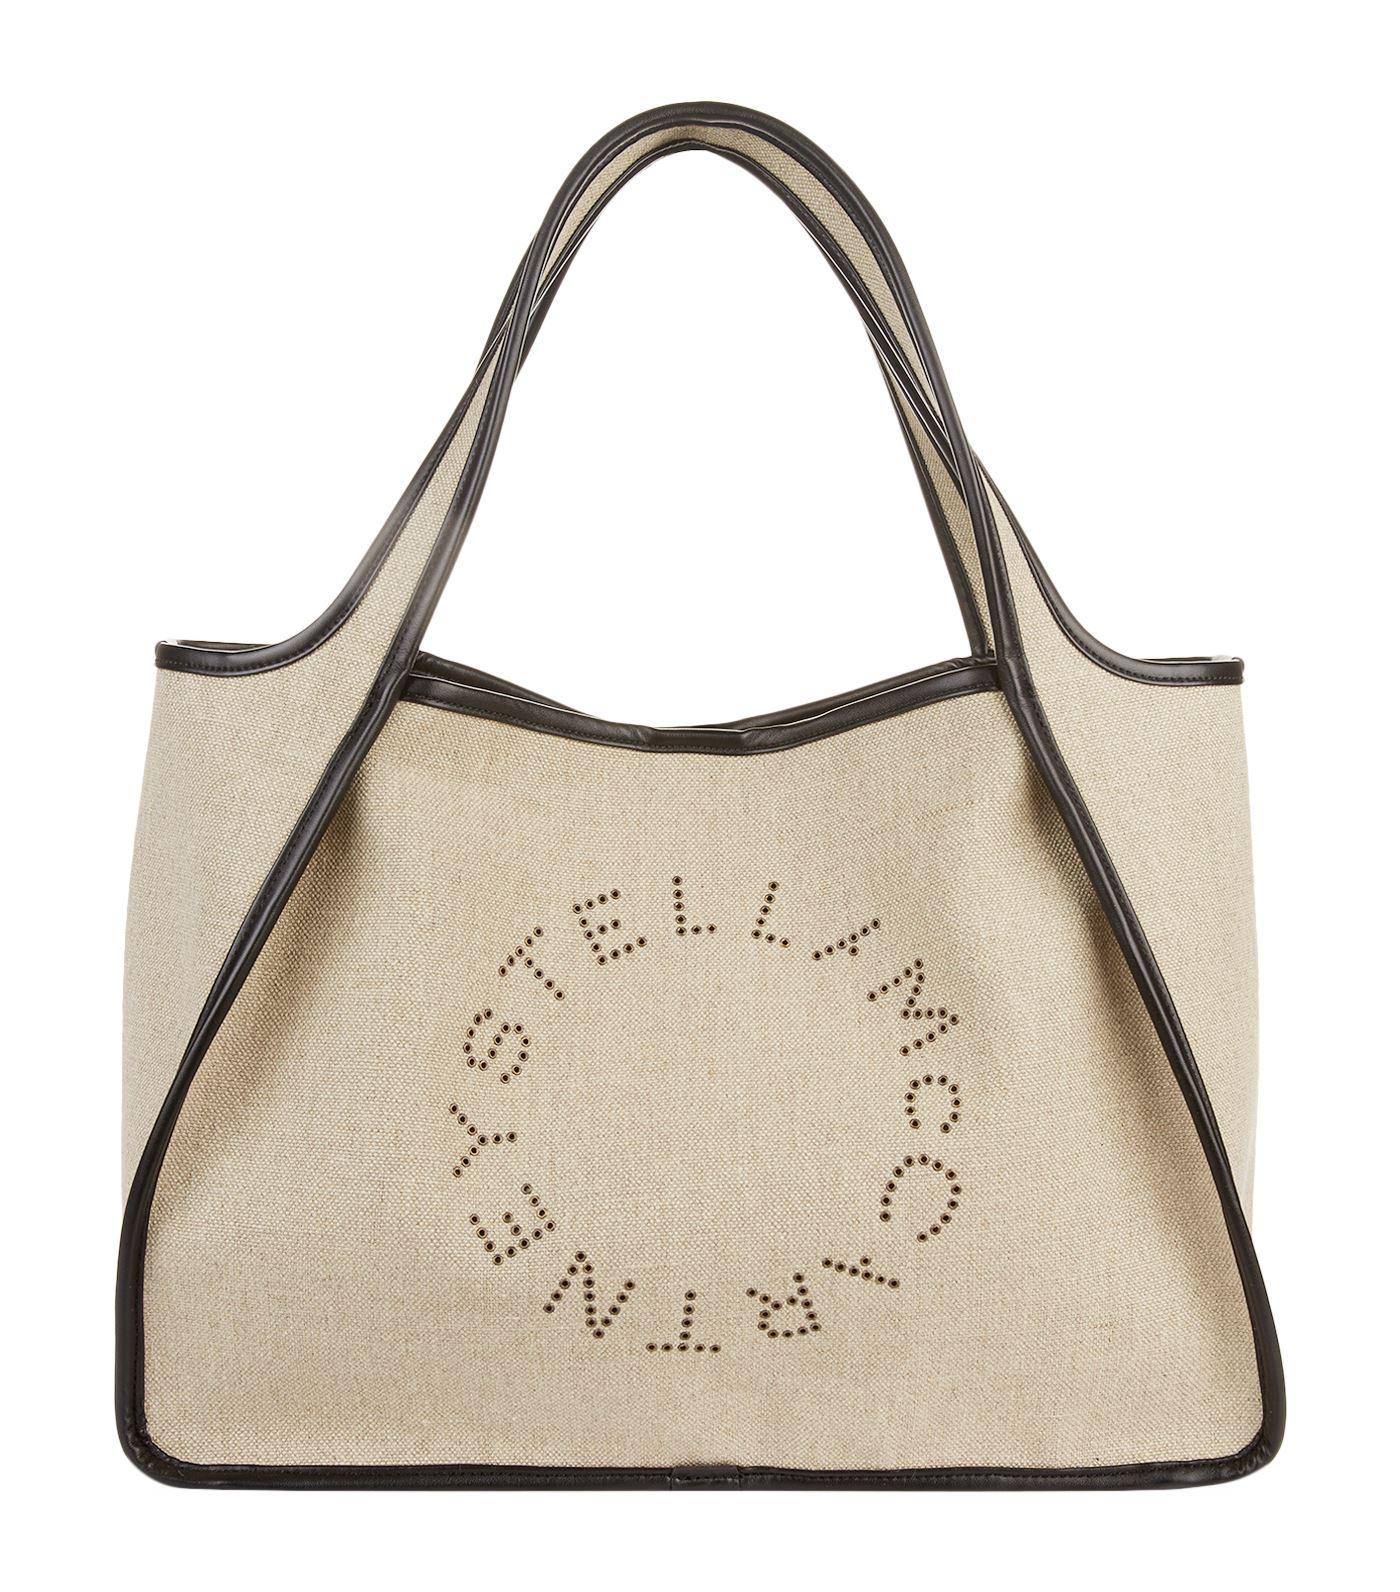 Stella McCartney Canvas Tote Bag in Natural | Lyst